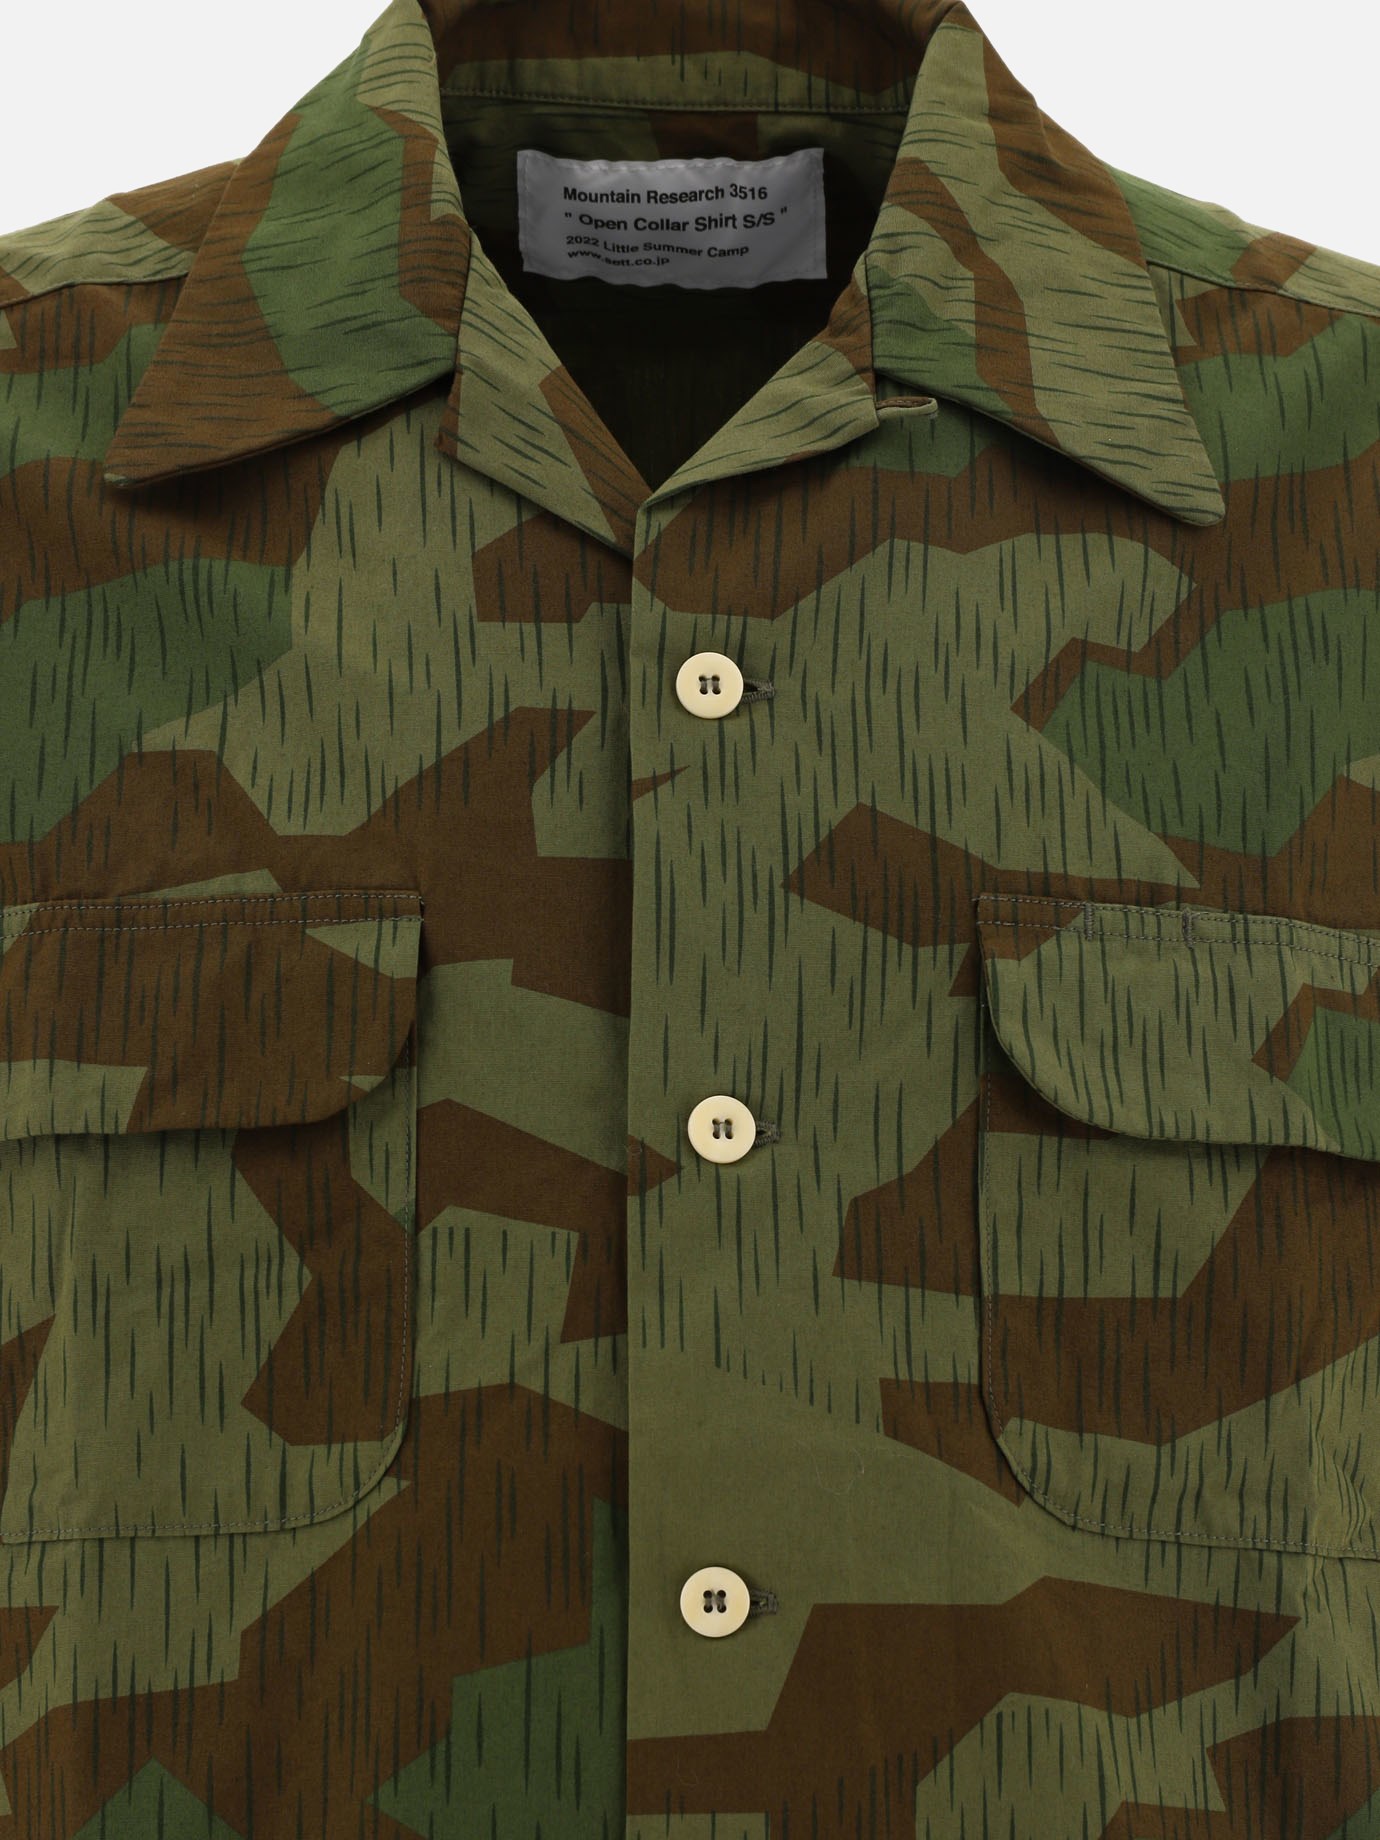 Camicia  Open Collar  by Mountain Research